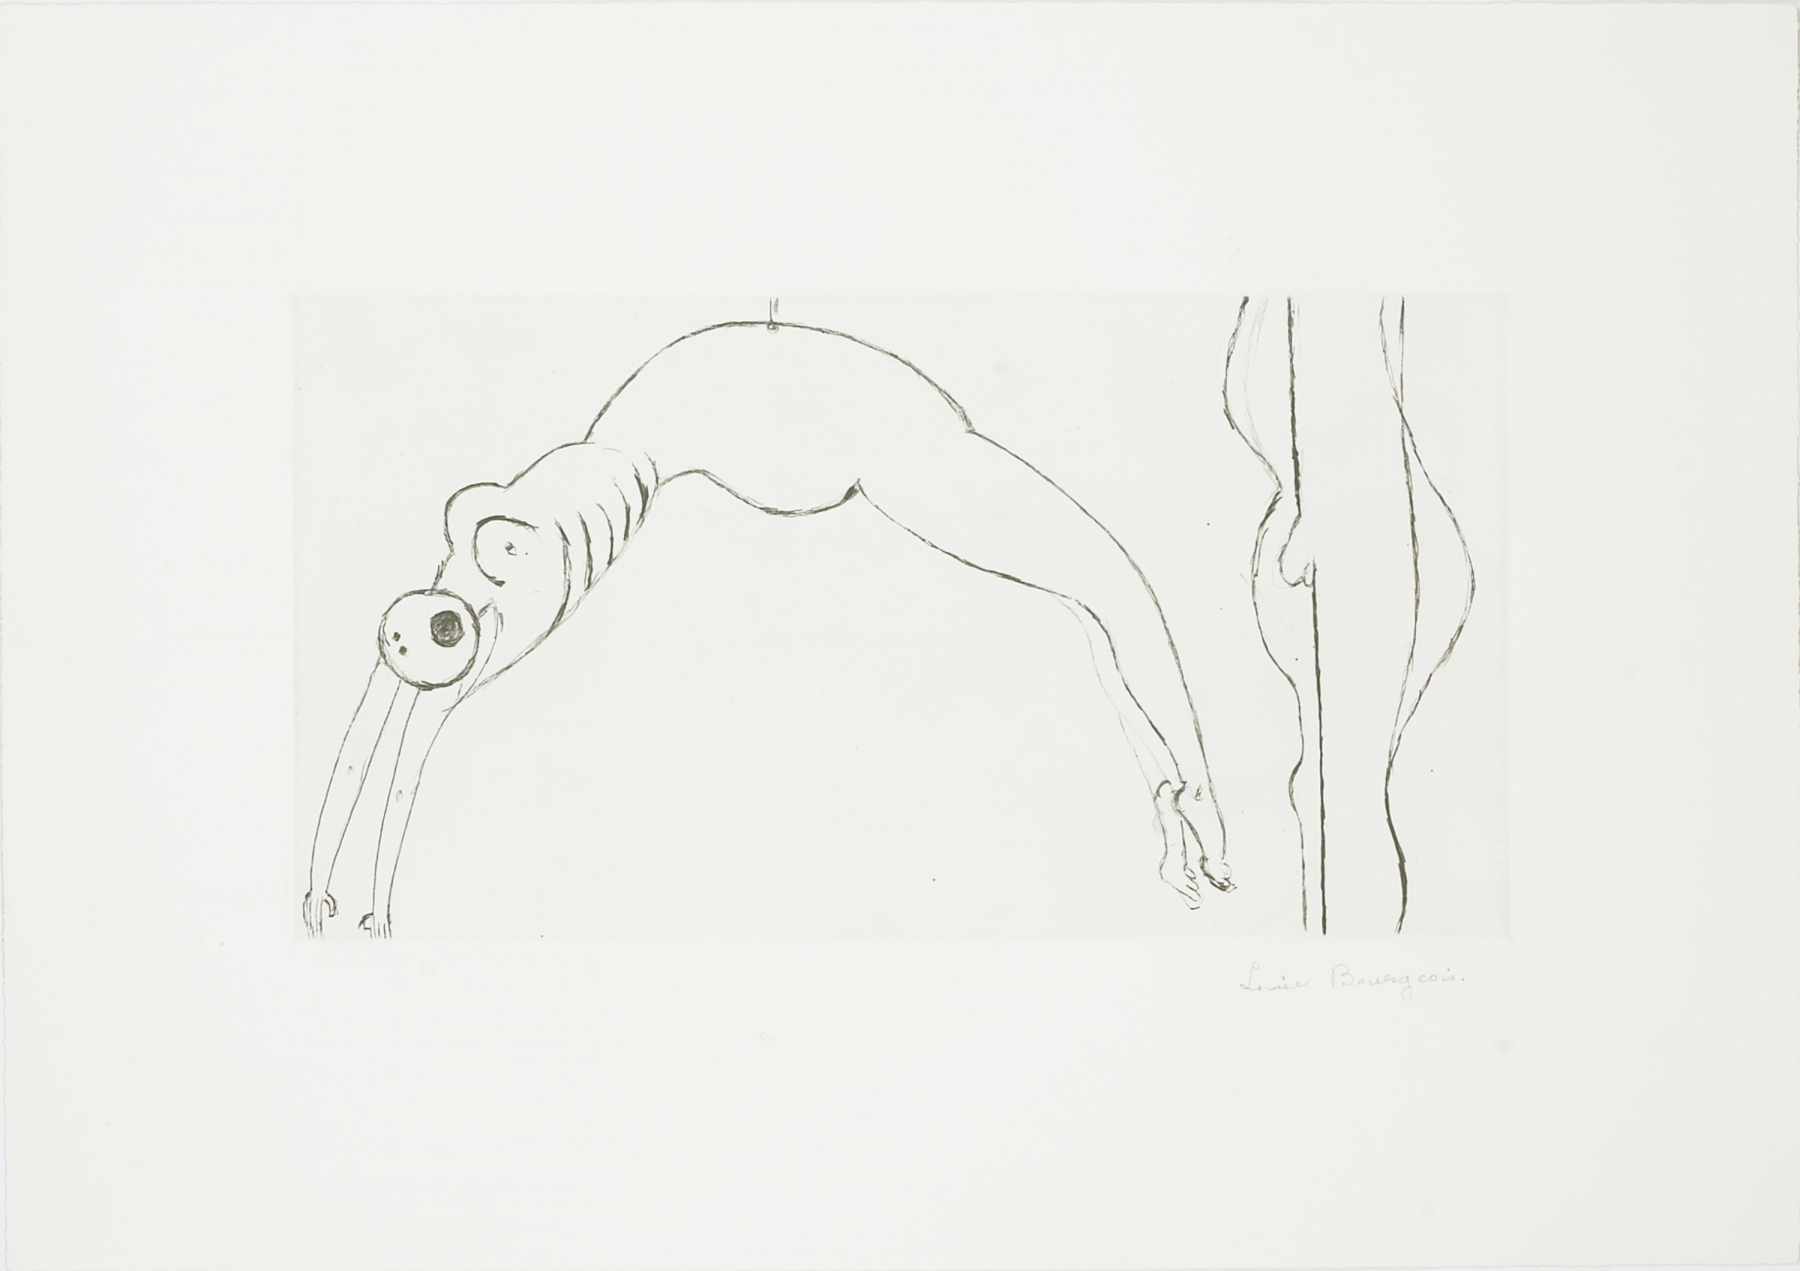 Arched Figure, 1993
Drypoint
15 5/8 x 22 inches (39.69 x 55.88 cm)
Edition of 50 + proofs

Inquire
&amp;nbsp;